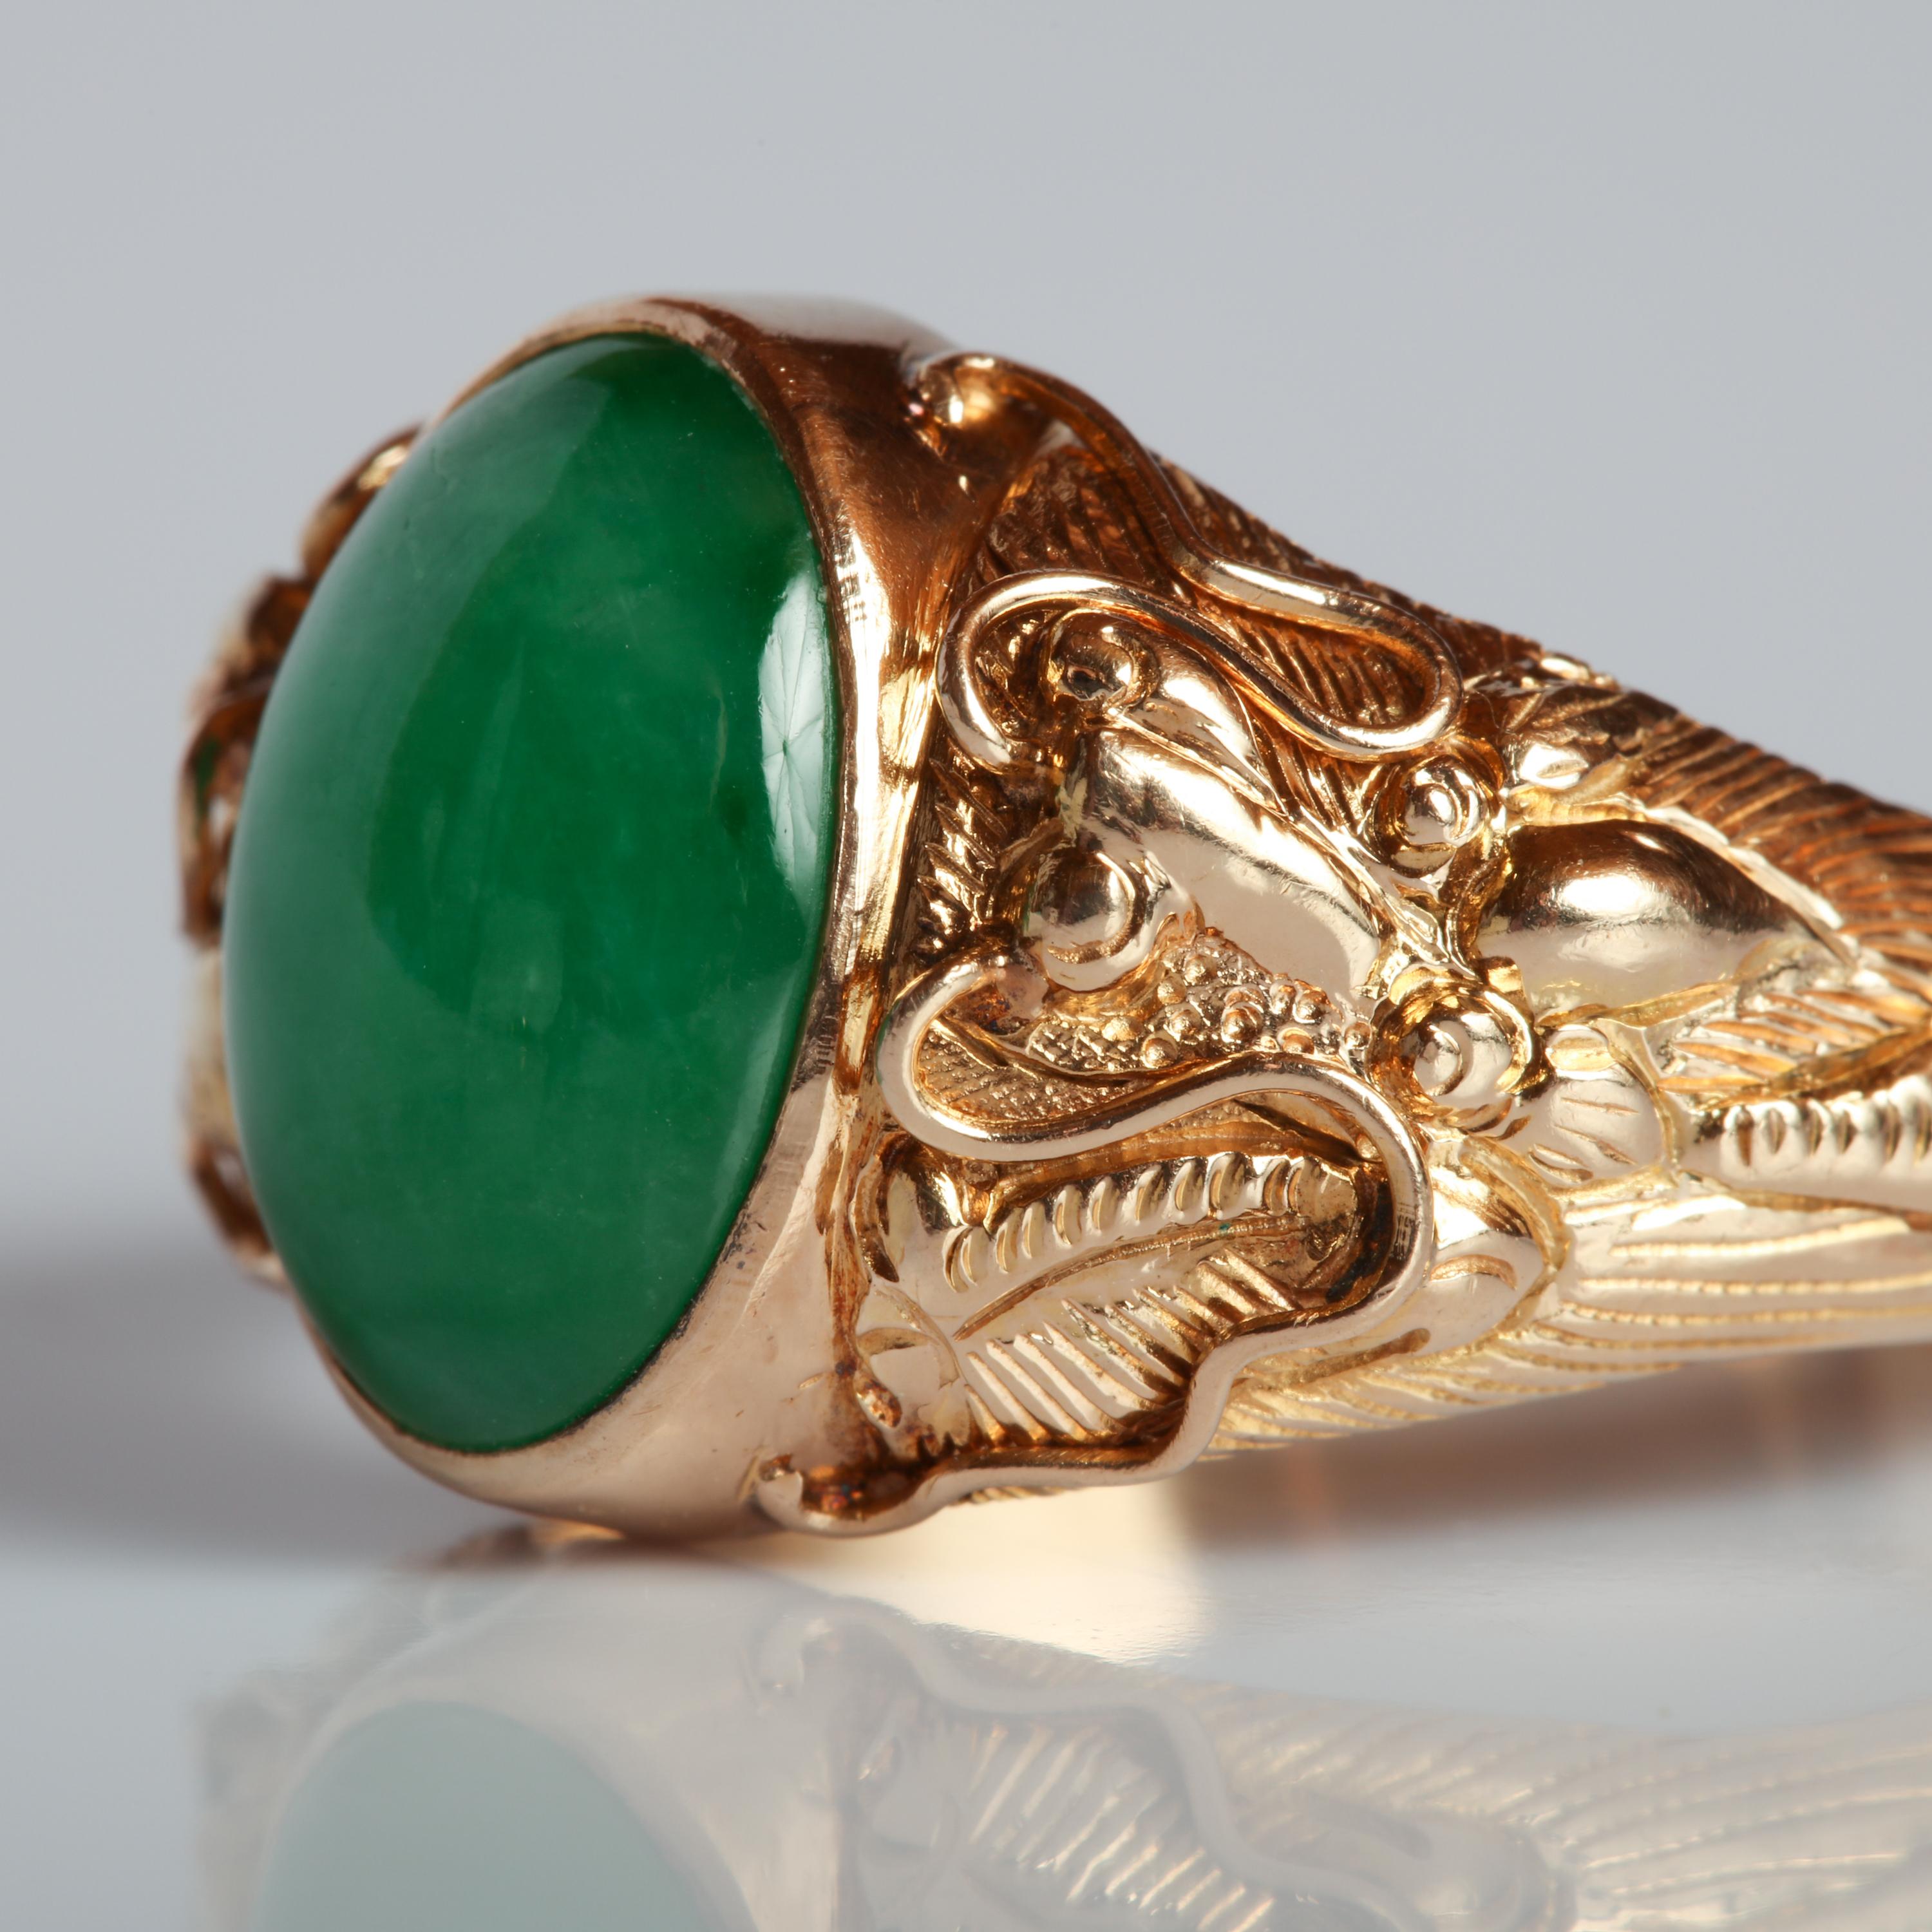 A rich, succulent highly-translucent, and gemmy deep apple green jade cabochon resides within its bezel and is guarded on either side by a pair of exotic, whimsical creatures from the sea. 

The detailing created by the master goldsmith is